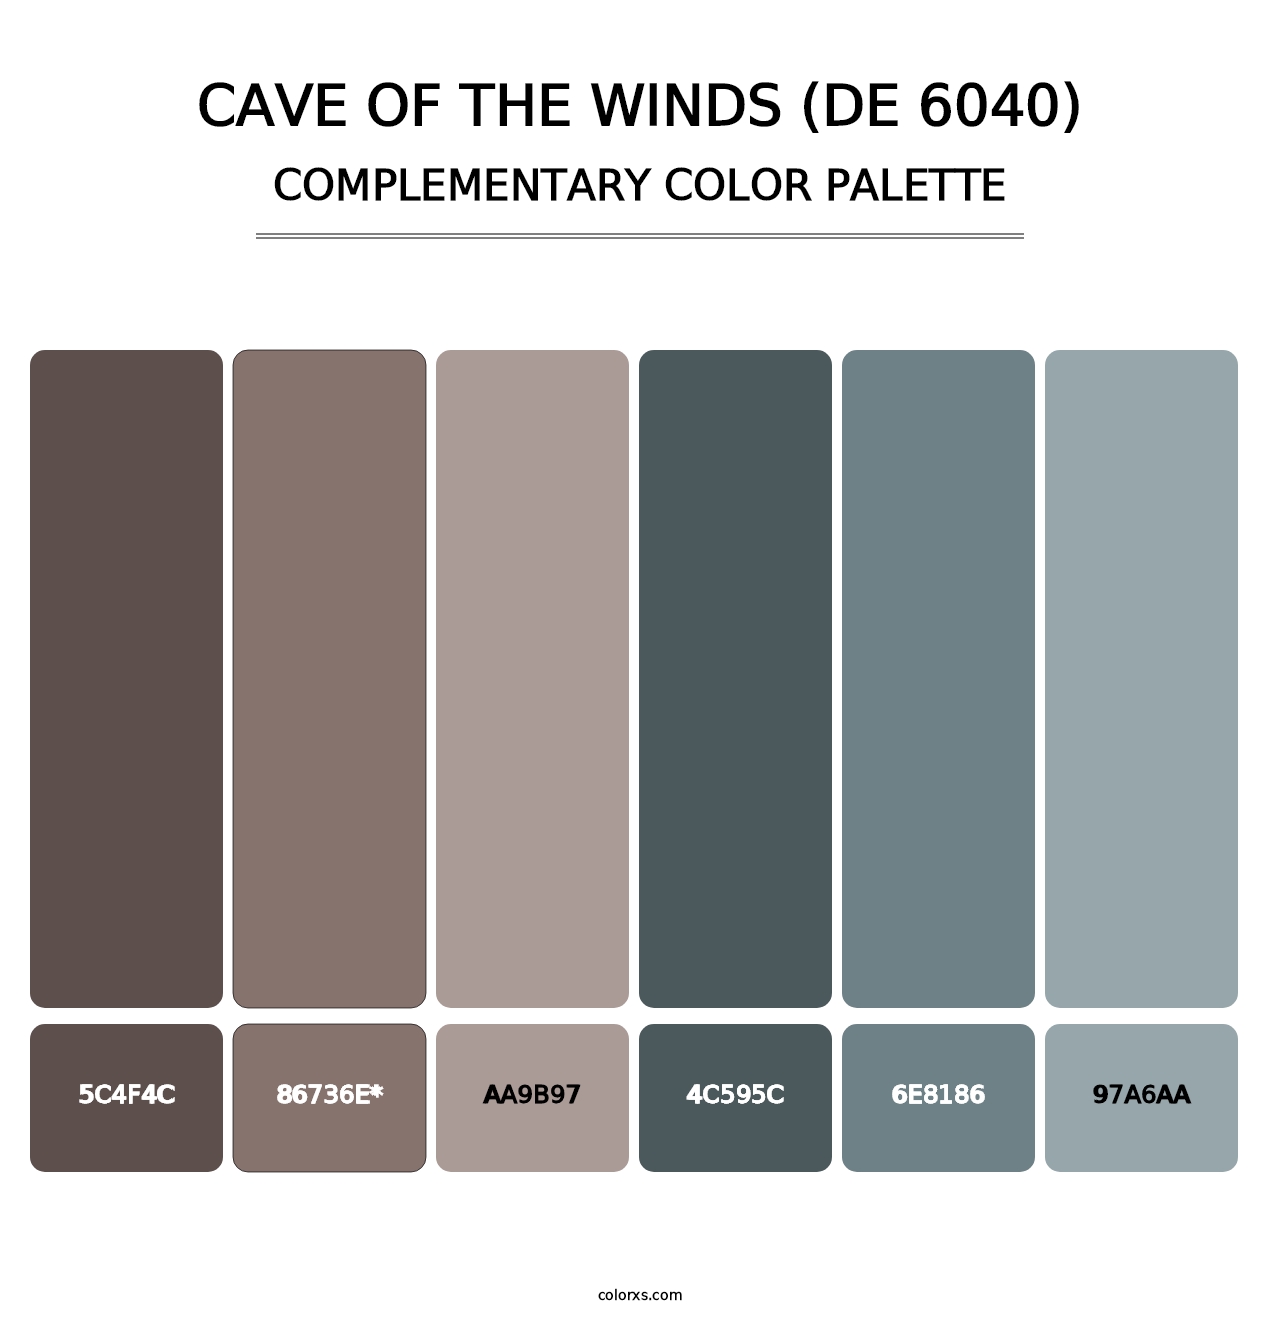 Cave of the Winds (DE 6040) - Complementary Color Palette